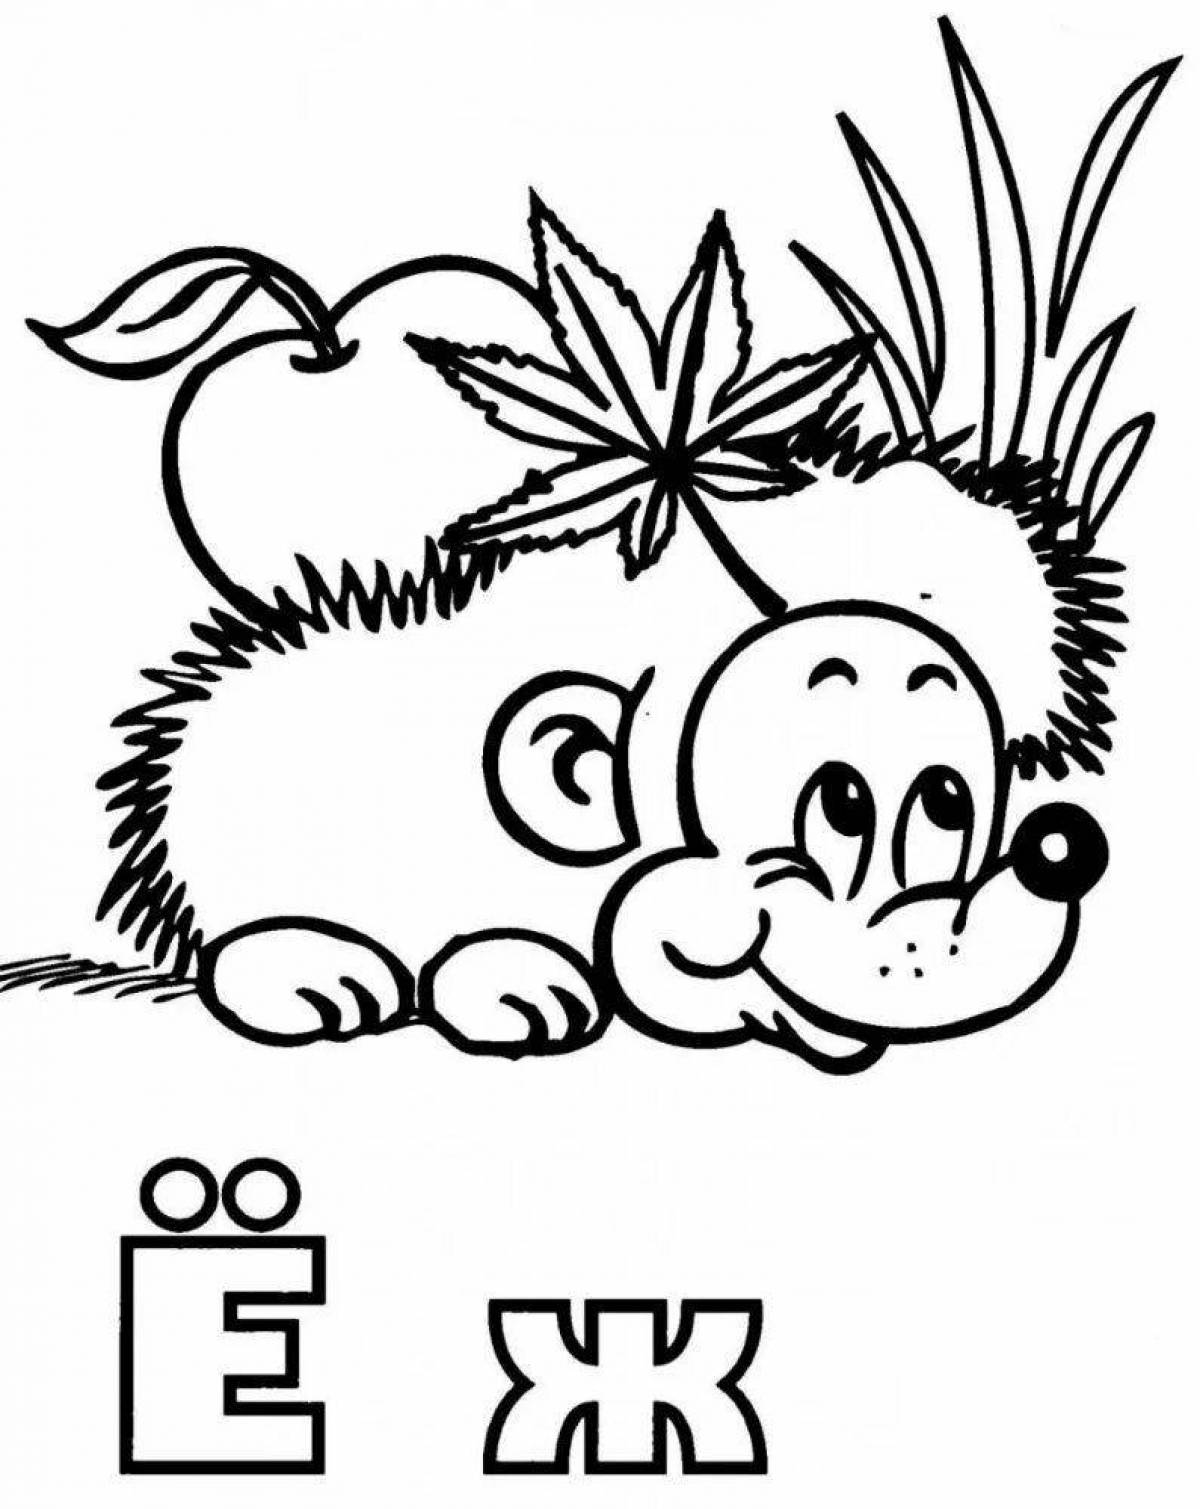 Fun letter e coloring pages for kids